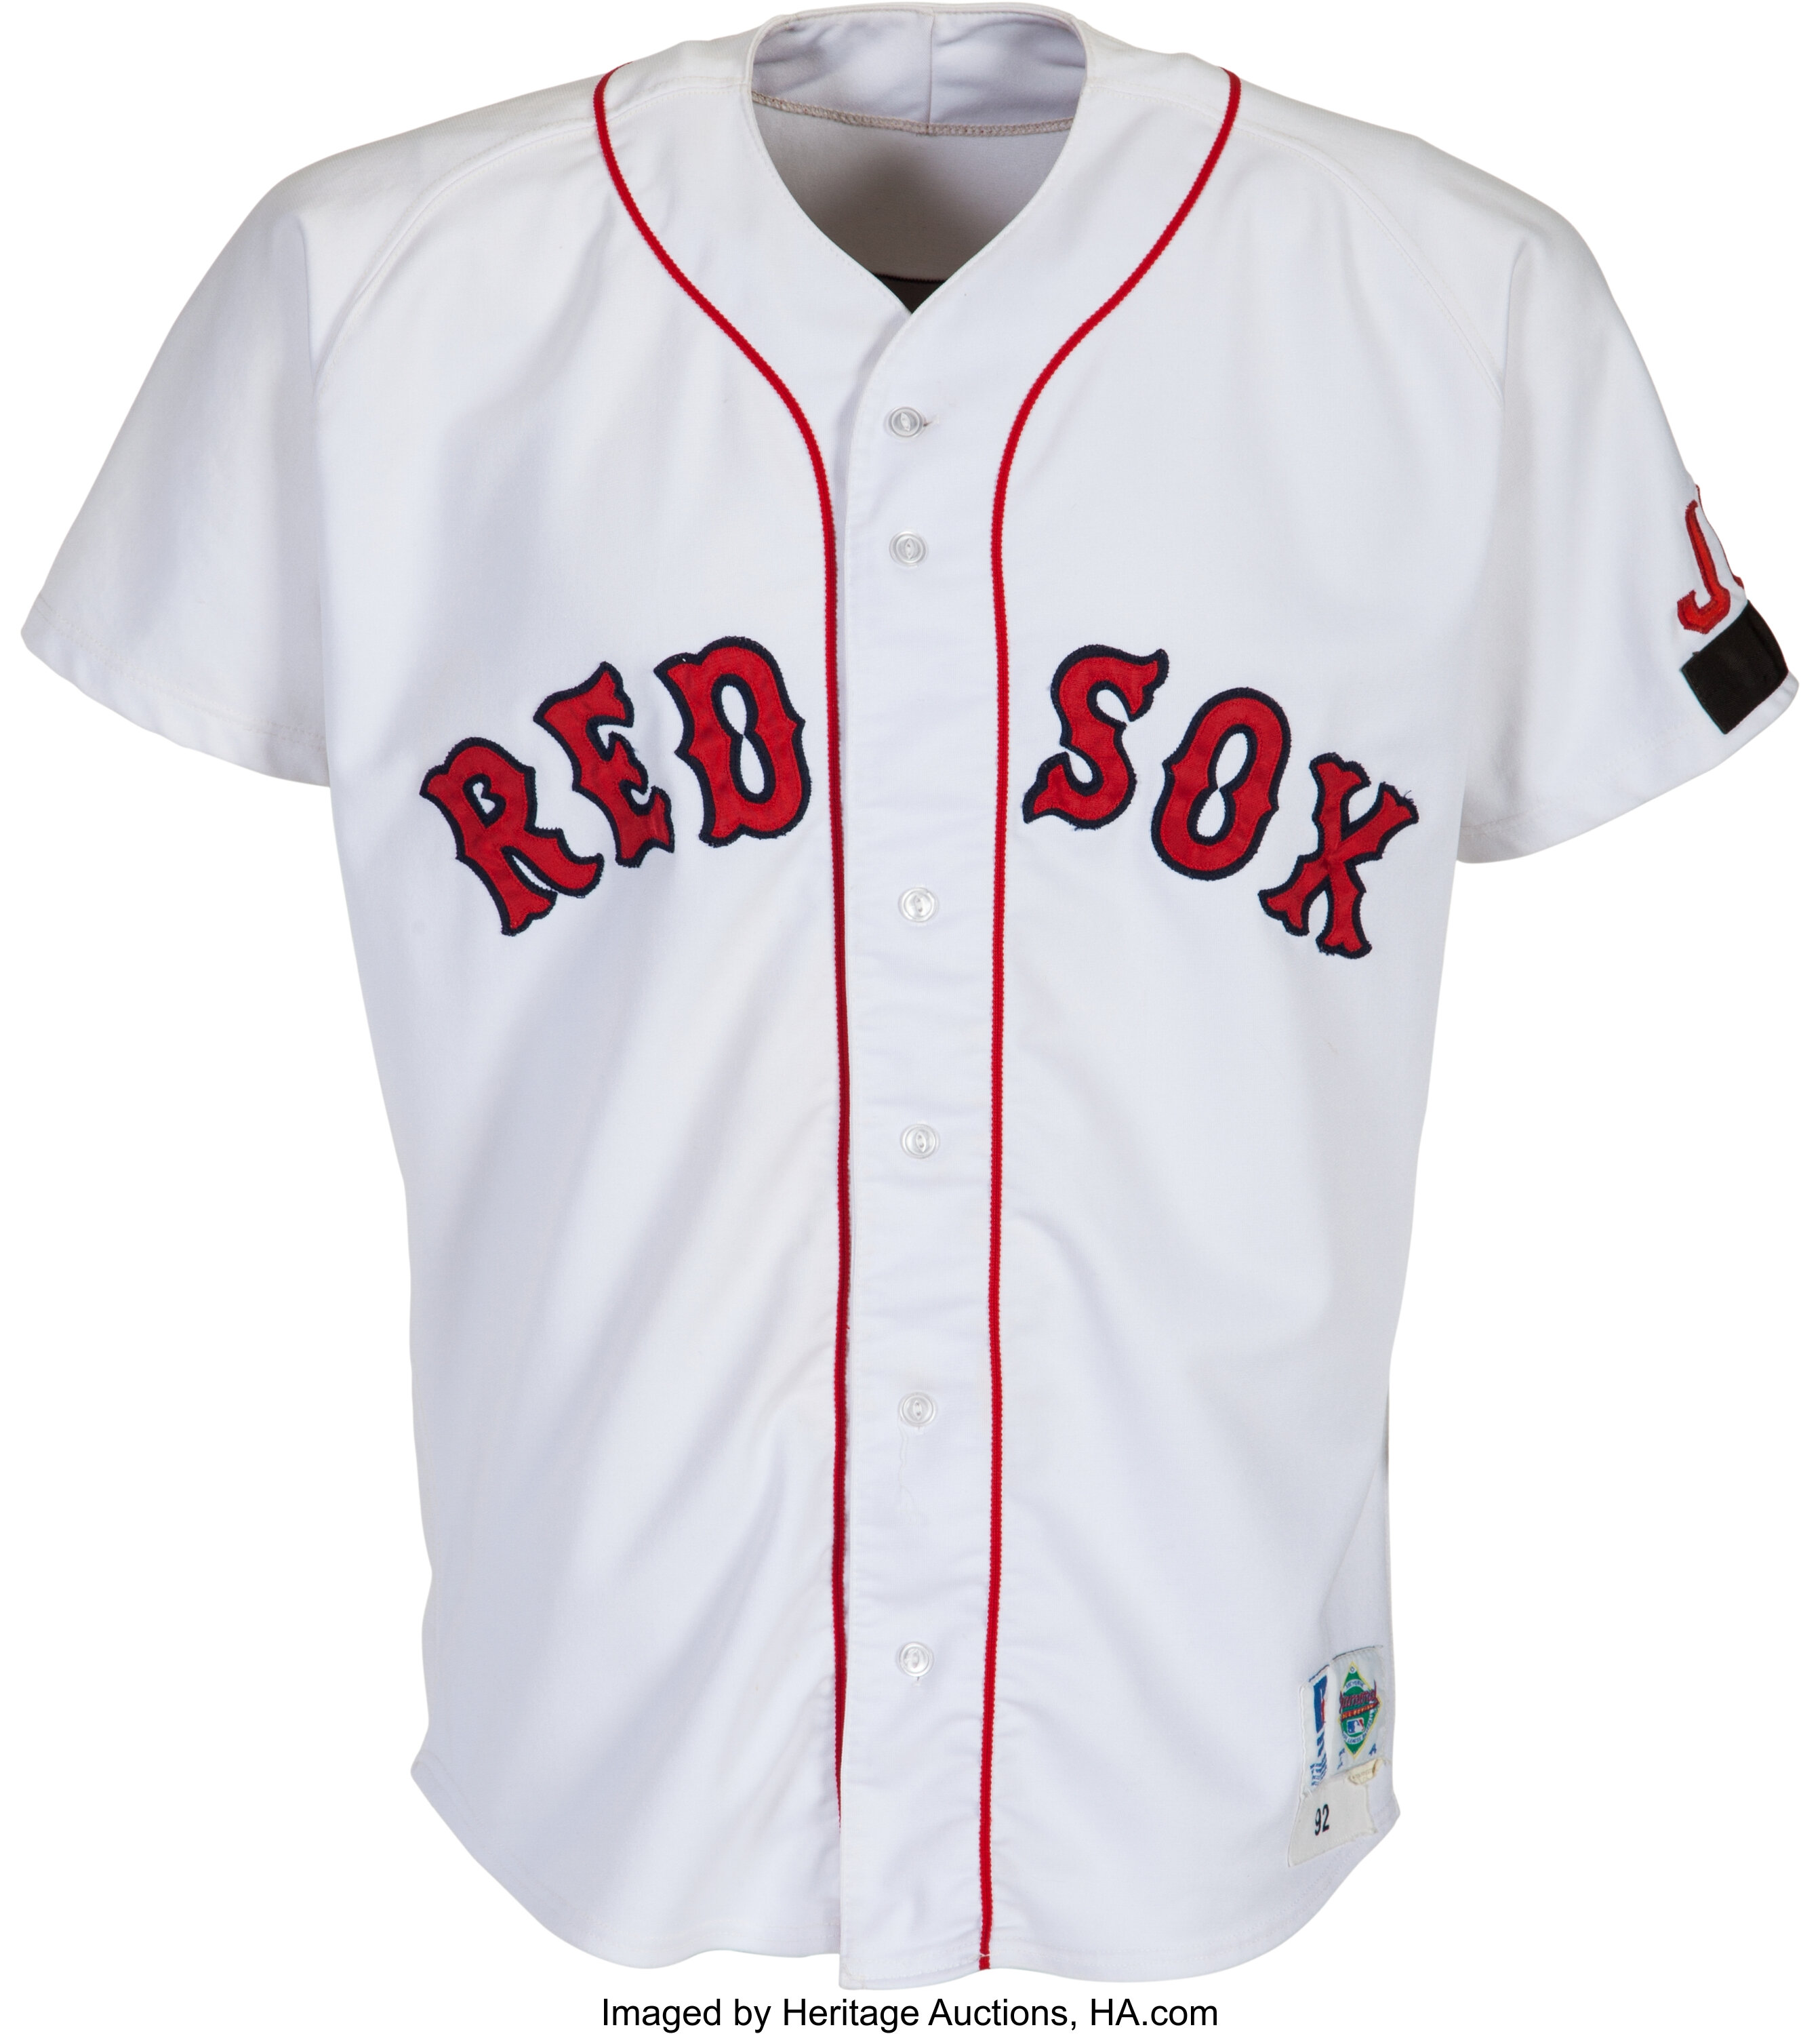 2 patch on red sox jersey